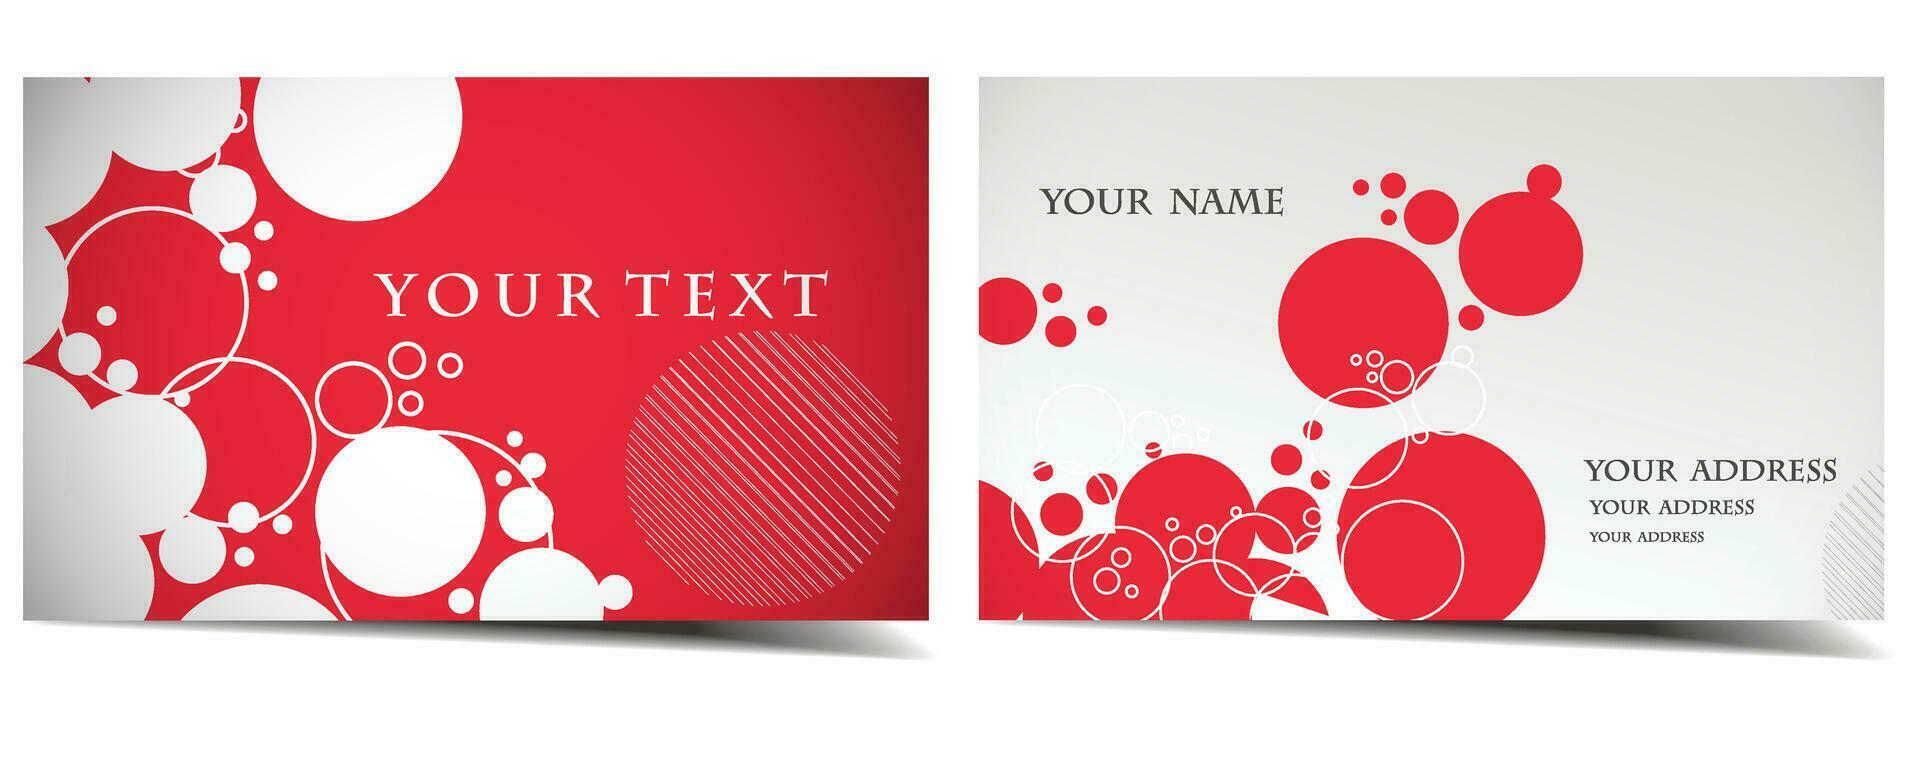 Visiting Card Design Template vector